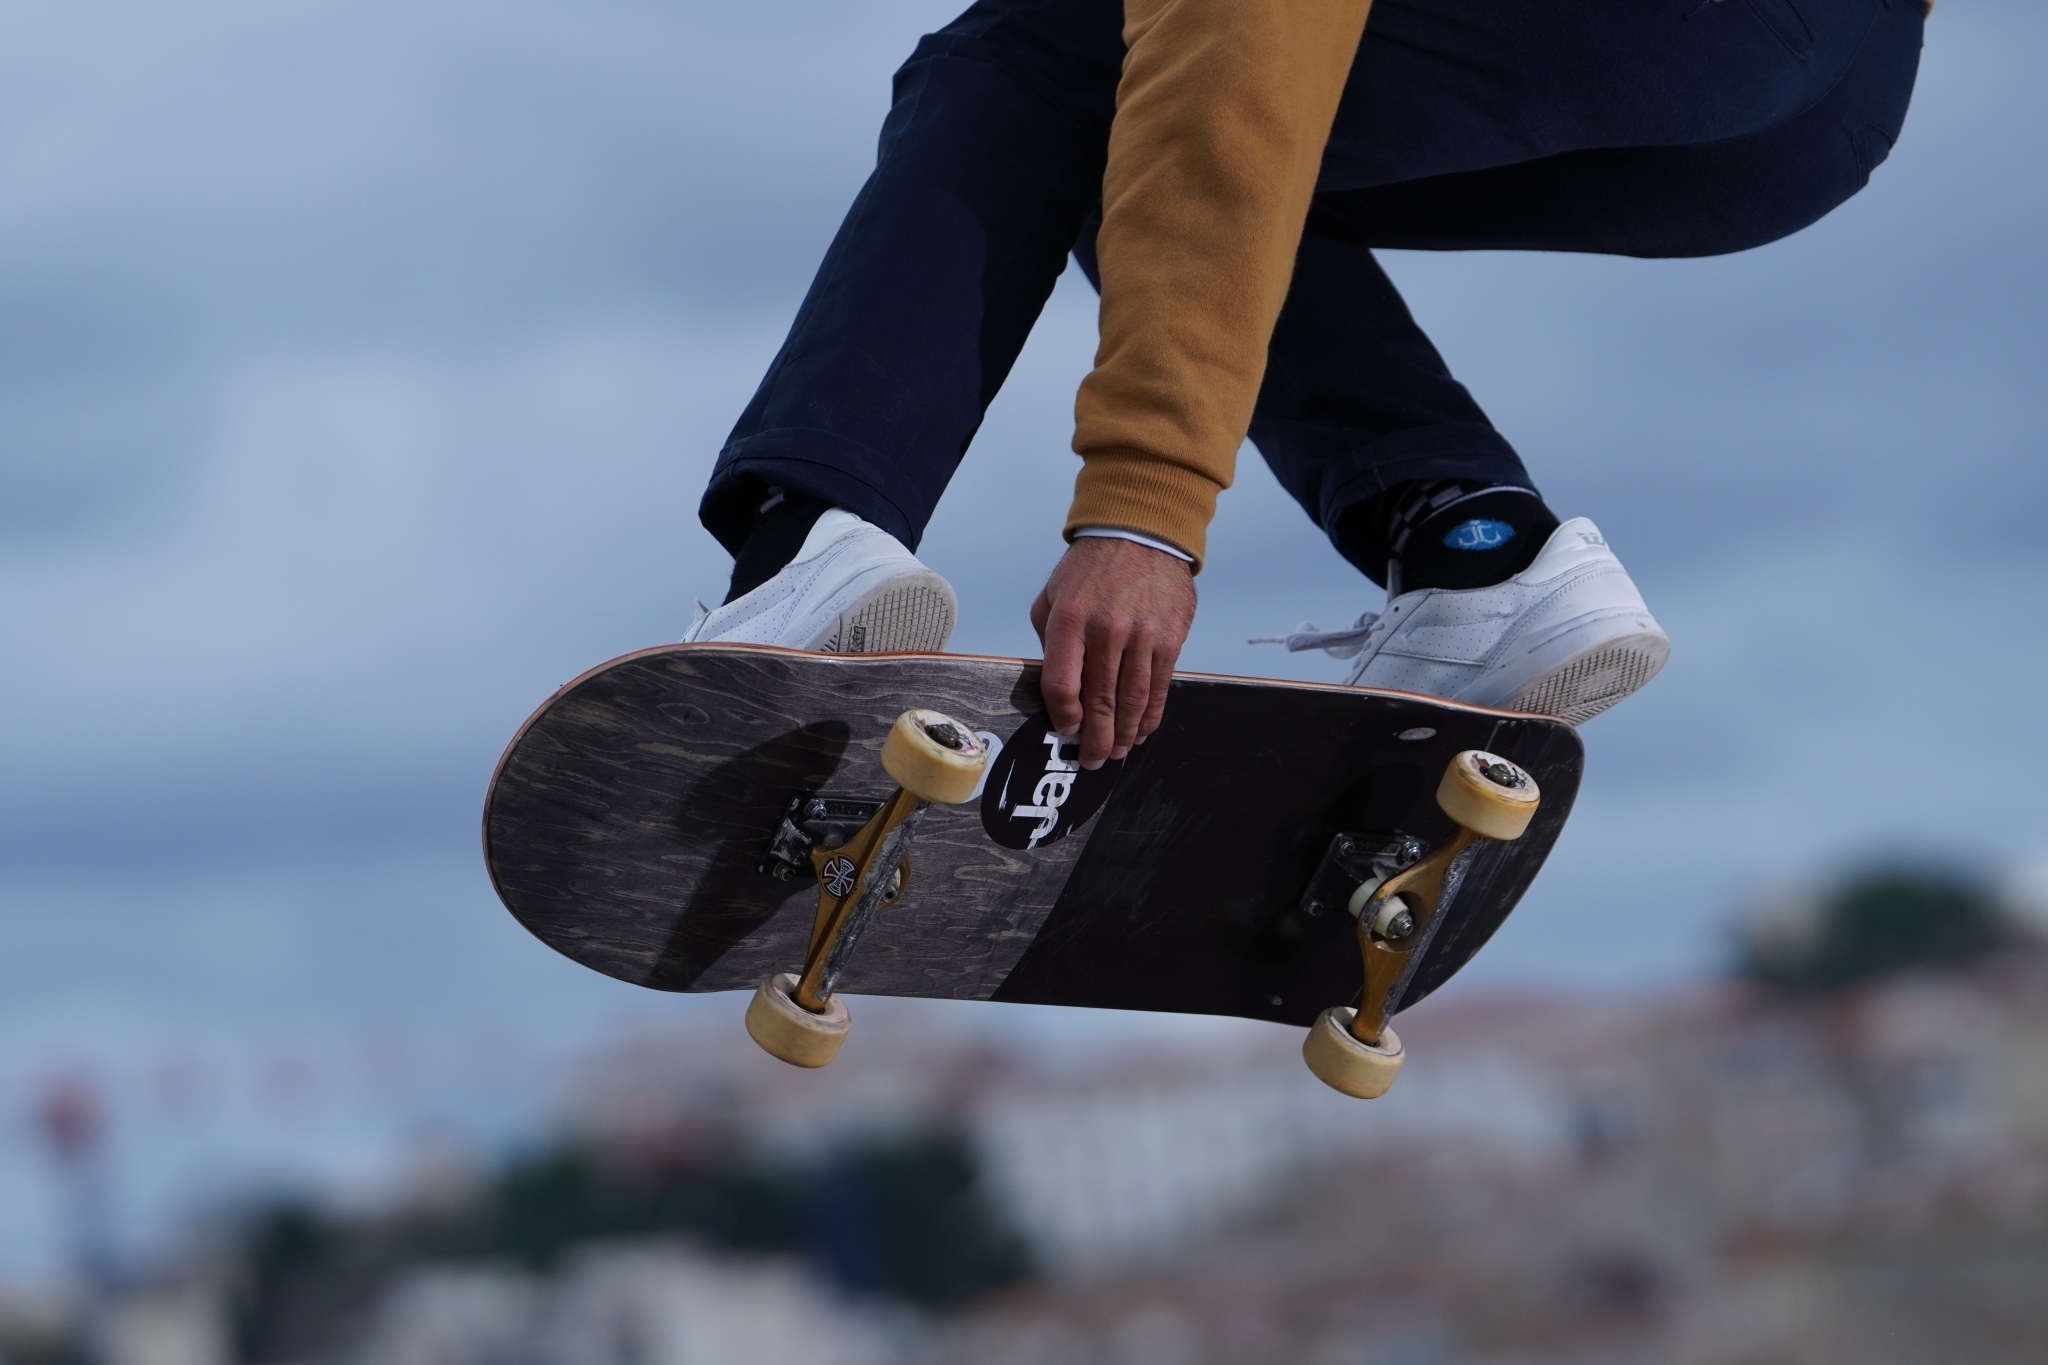 Close-up of skateboarder's feet while the board is tilted in the air mid-jump